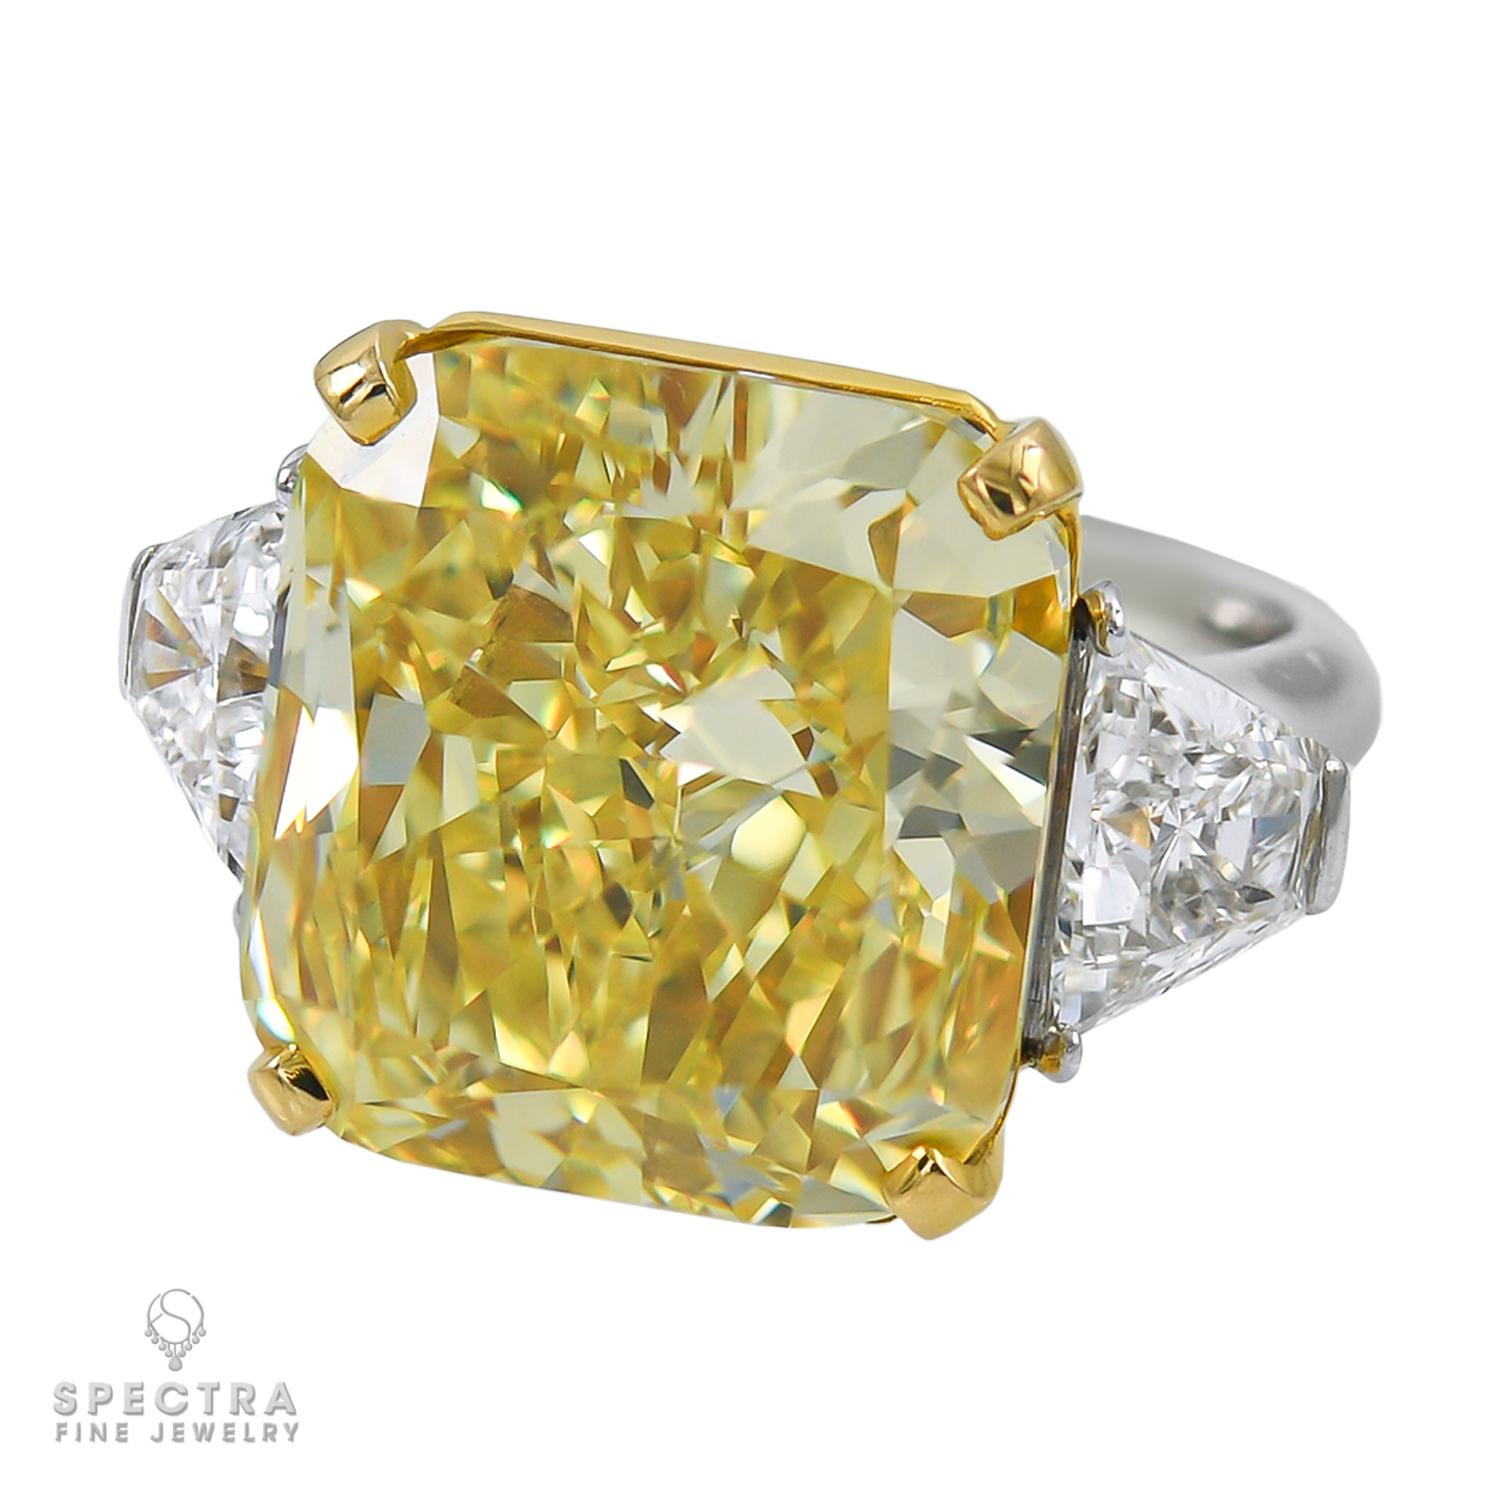 An important ring comprising of a radiant diamond weighing 22.86 carats. 
The diamond is certified by GIA stating that it's of fancy vivid yellow color, VVS2 clarity.
A copy of the GIA certificate will be provided upon request.
It's accented by two